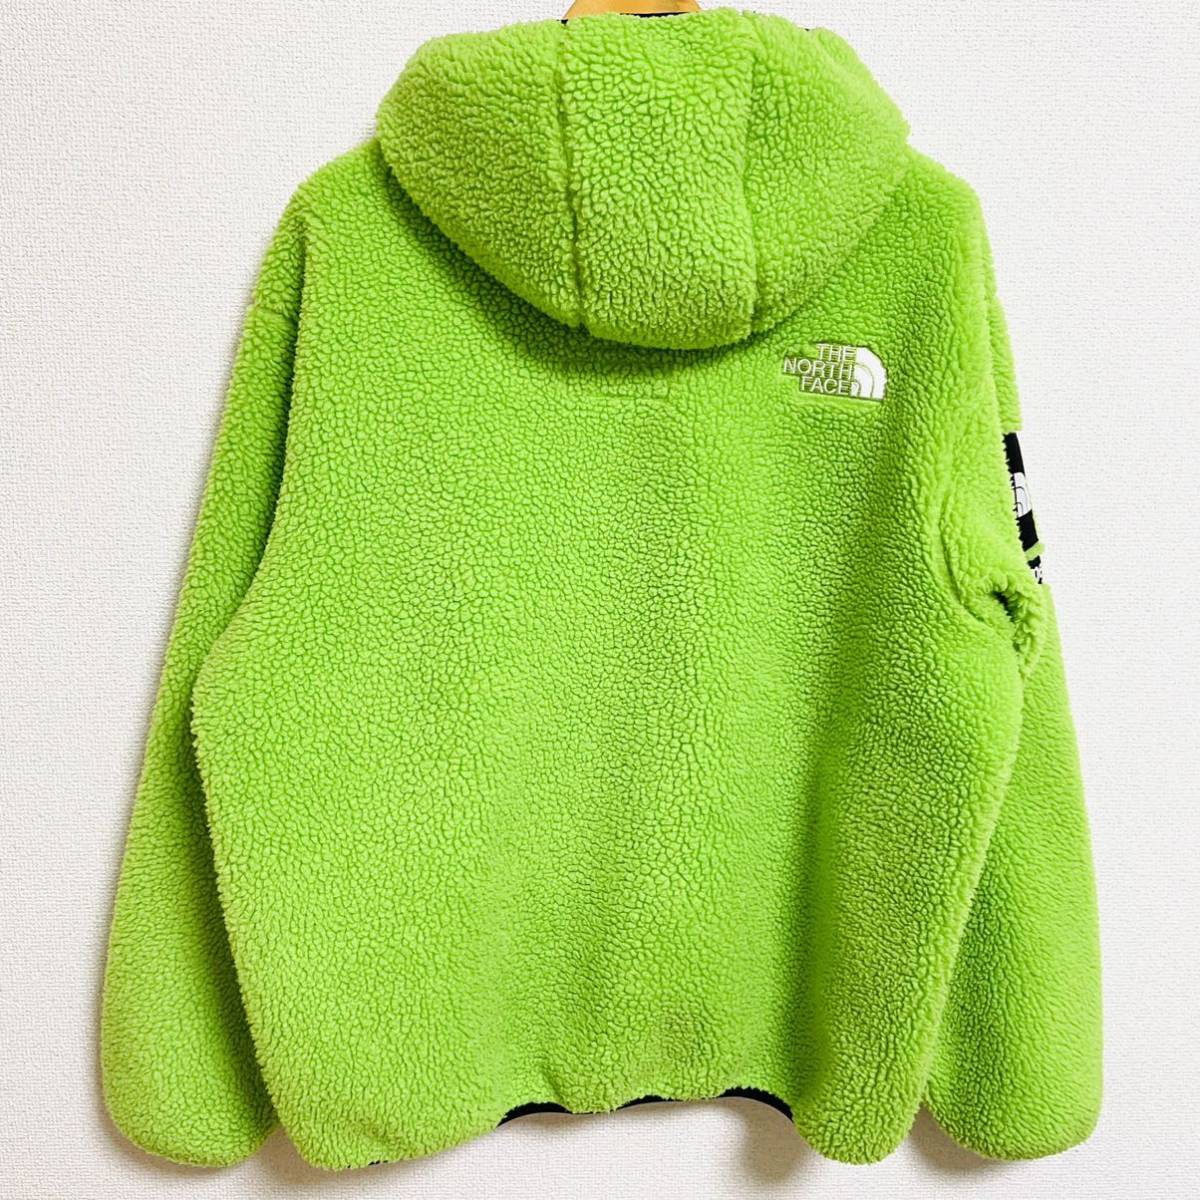 Supreme The North Face S Logo Hooded Fleece Jacket Lime White L 20aw 2020年  ライム グリーン 緑 白 Sロゴ フリース コラボ 納品書付き